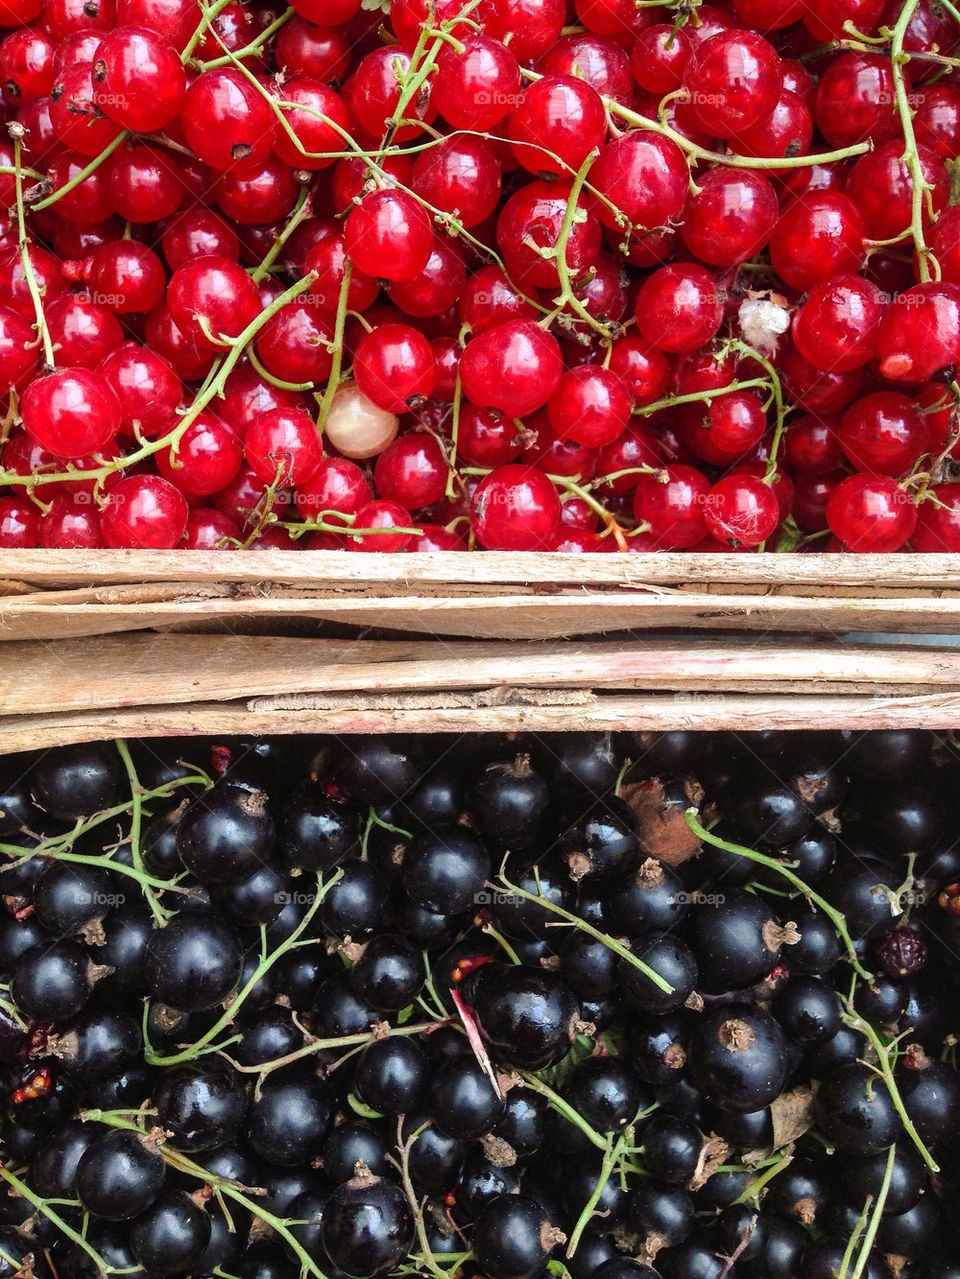 Red currants and black currants